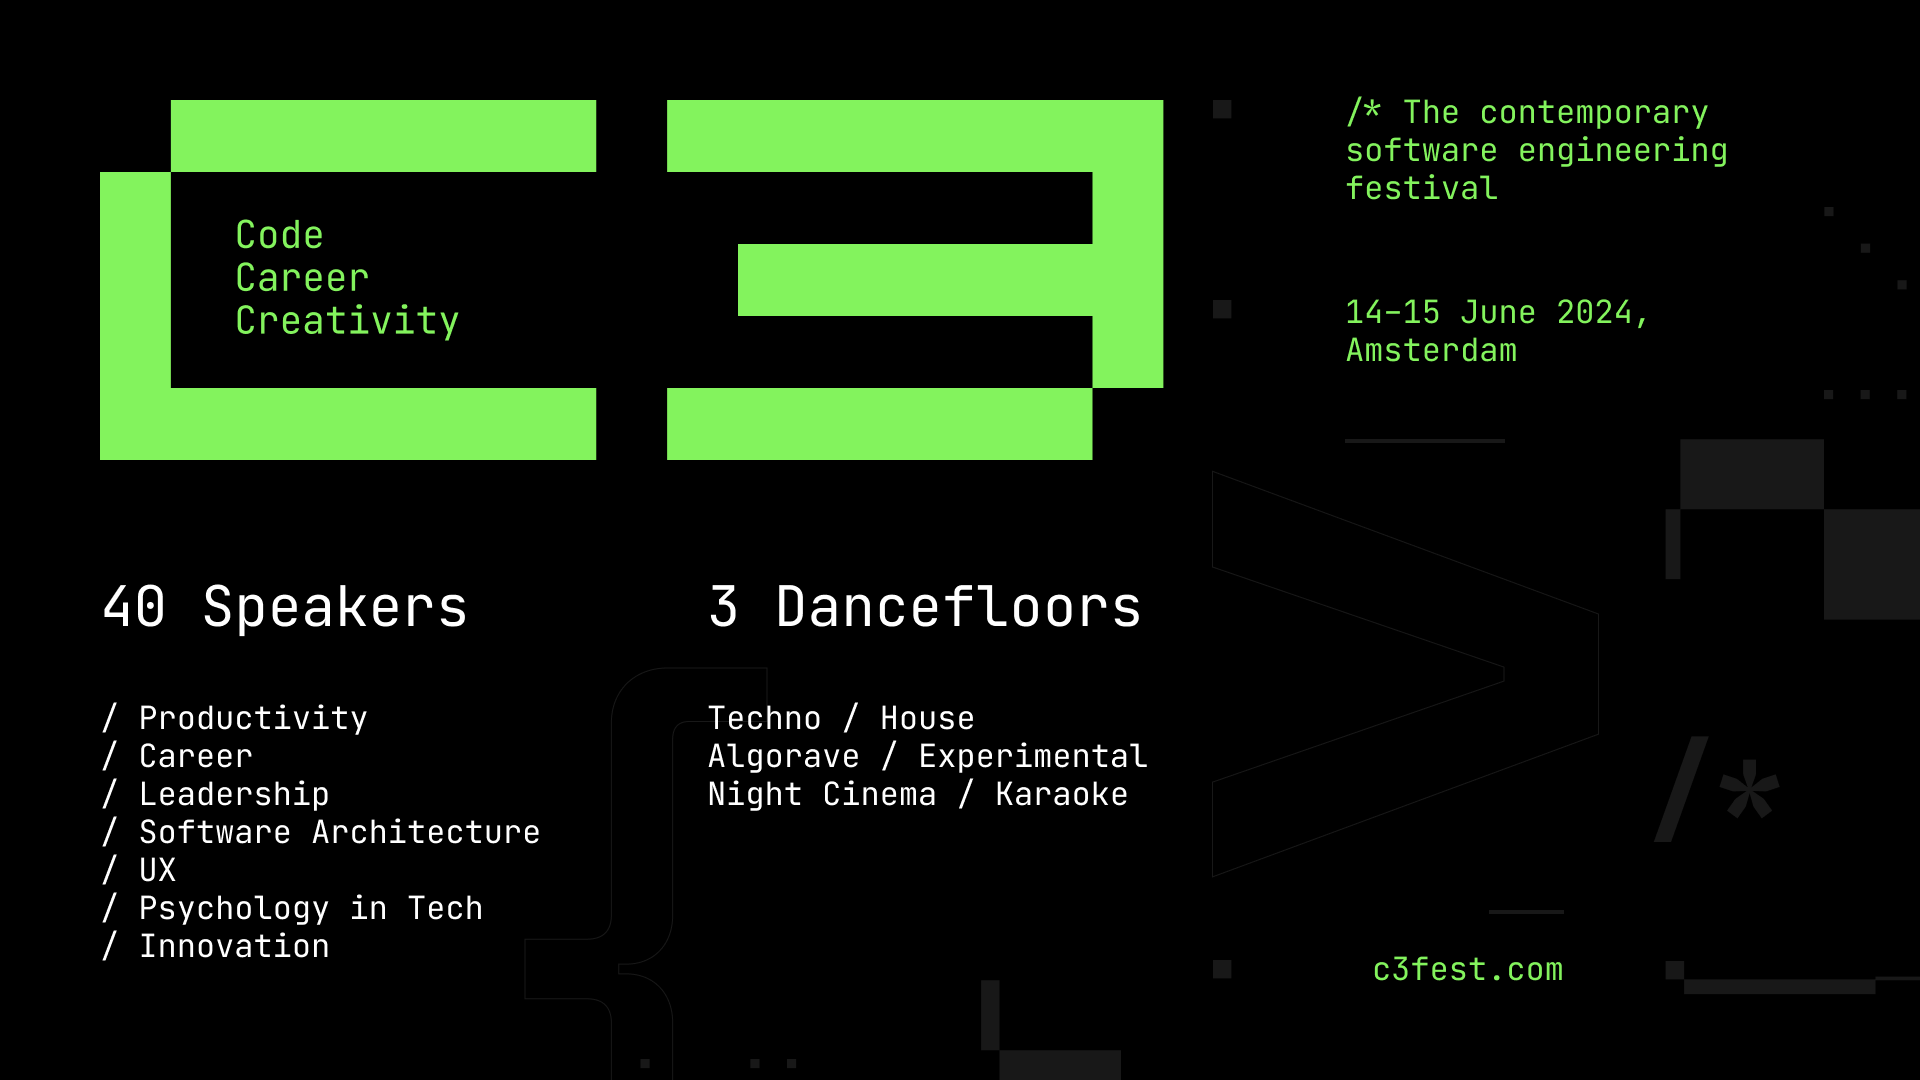 Introducing C3 Dev Festival - the contemporary software engineering and design festival